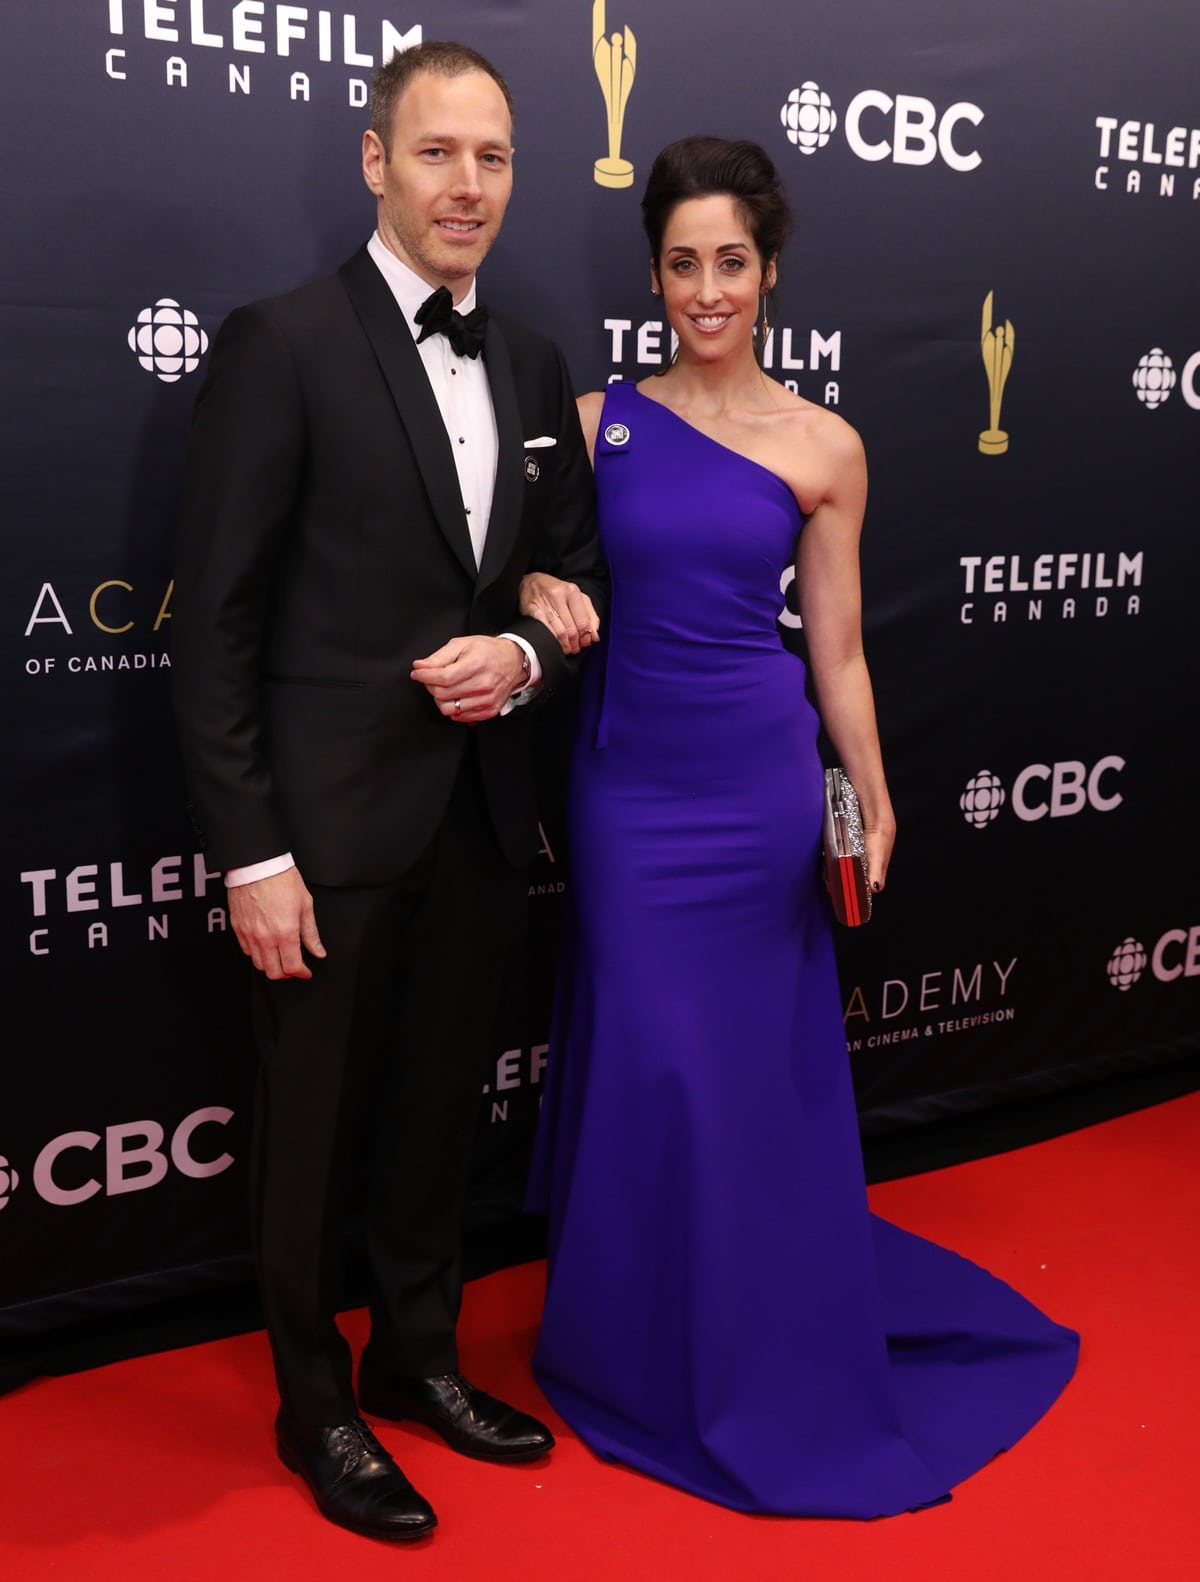 Philip Sternberg and Catherine Reitman are both on-screen and off-screen partners, balancing their busy careers with their family life